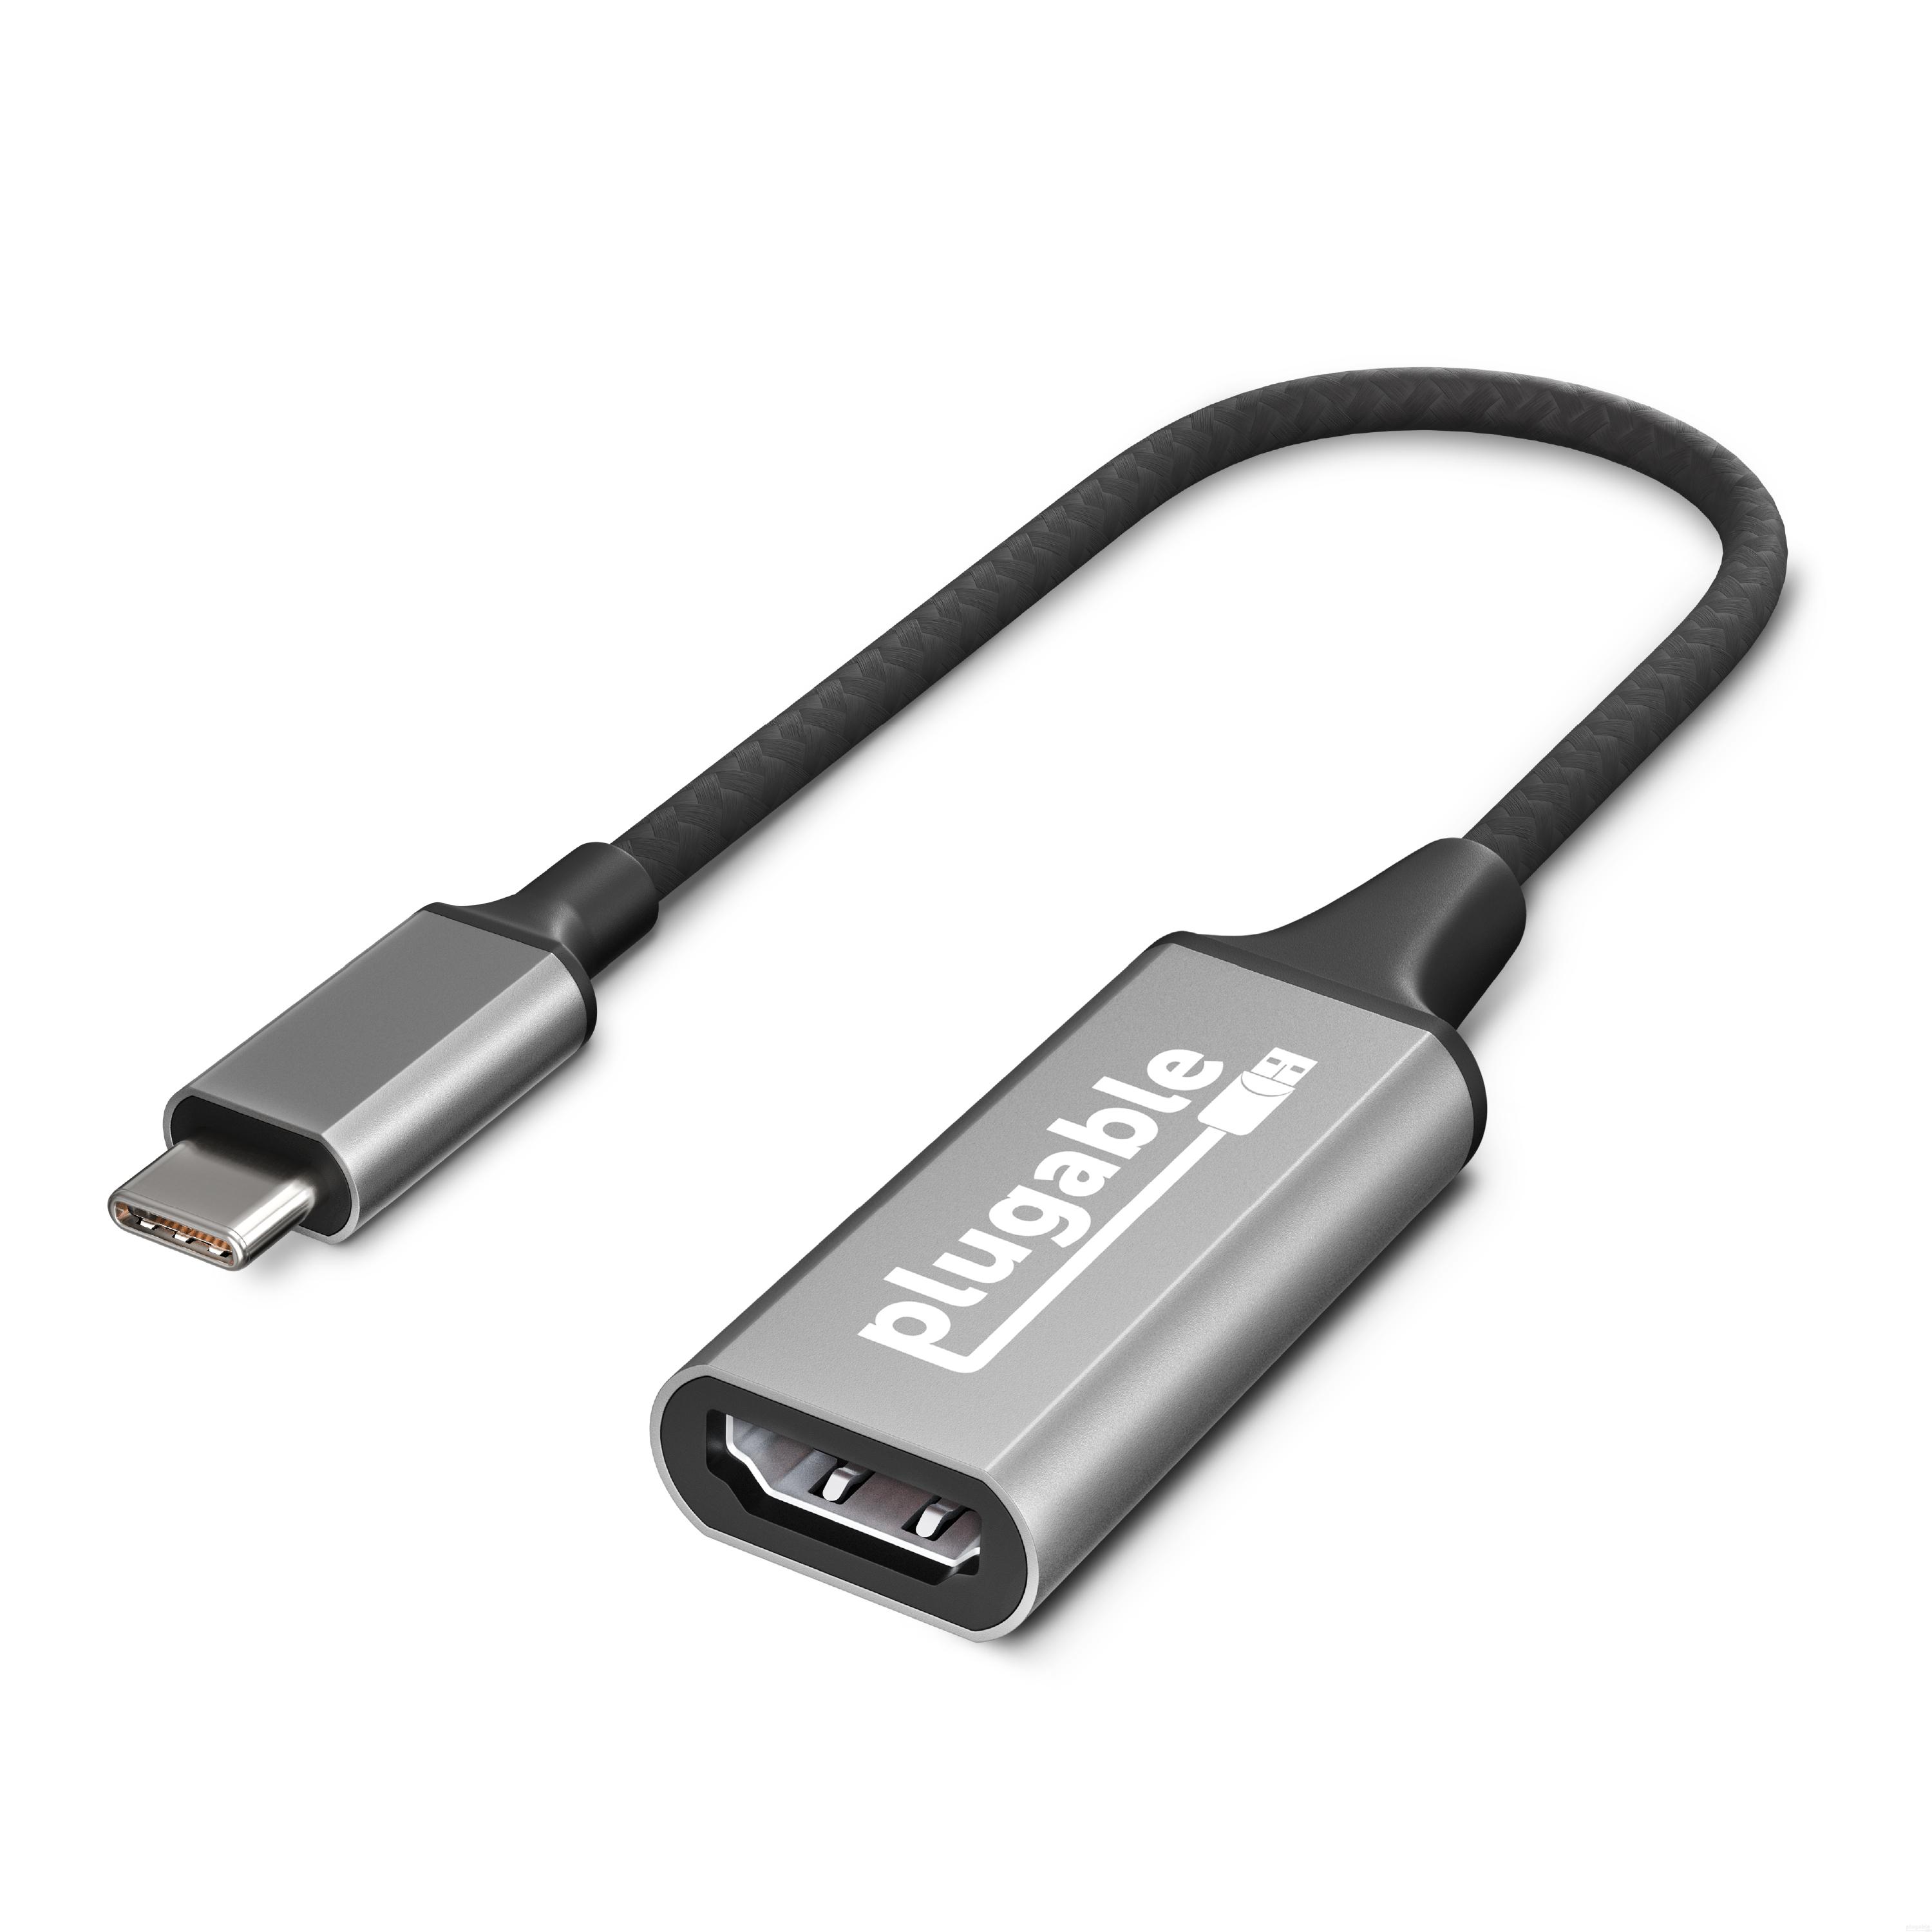 Plugable USB C to HDMI 2.0 Adapter Compatible with 2018 iPad Pro, 2018 MacBook Air, 2018 MacBook Pro, Dell XPS 13 & 15, Thunderbolt 3 Ports & More (Supports Resolutions up to 4K@60Hz) - image 1 of 6